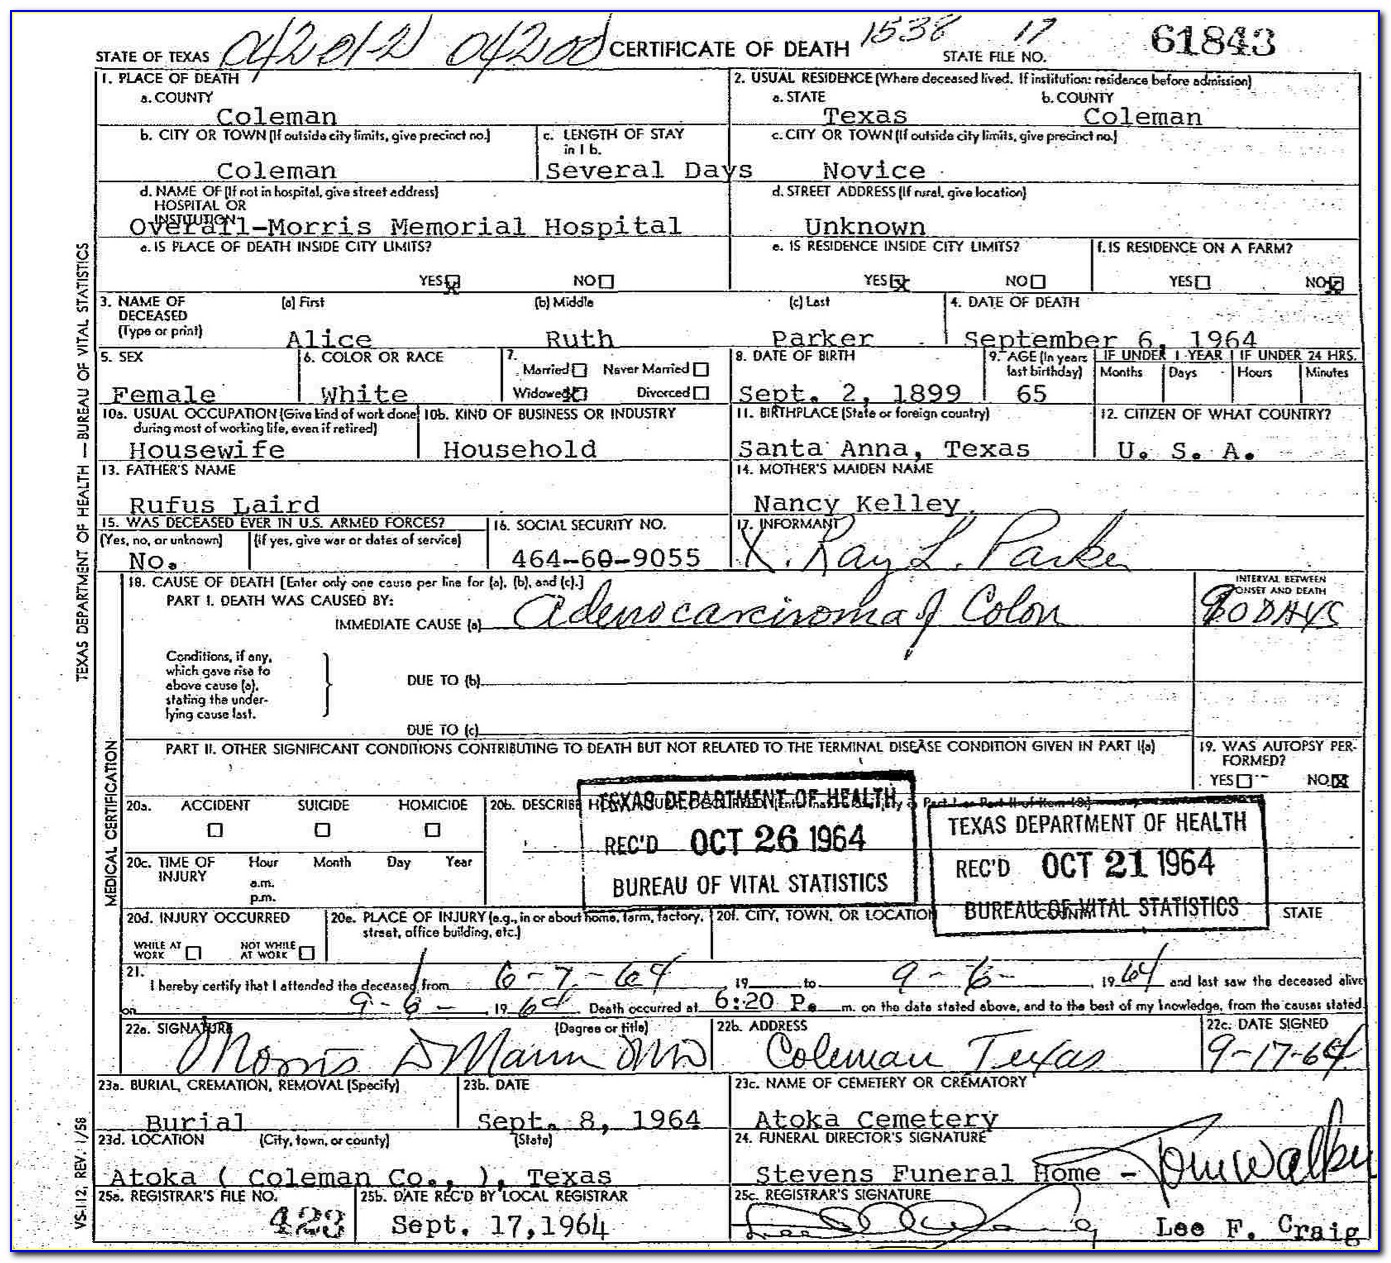 Parker County Birth Certificate Records